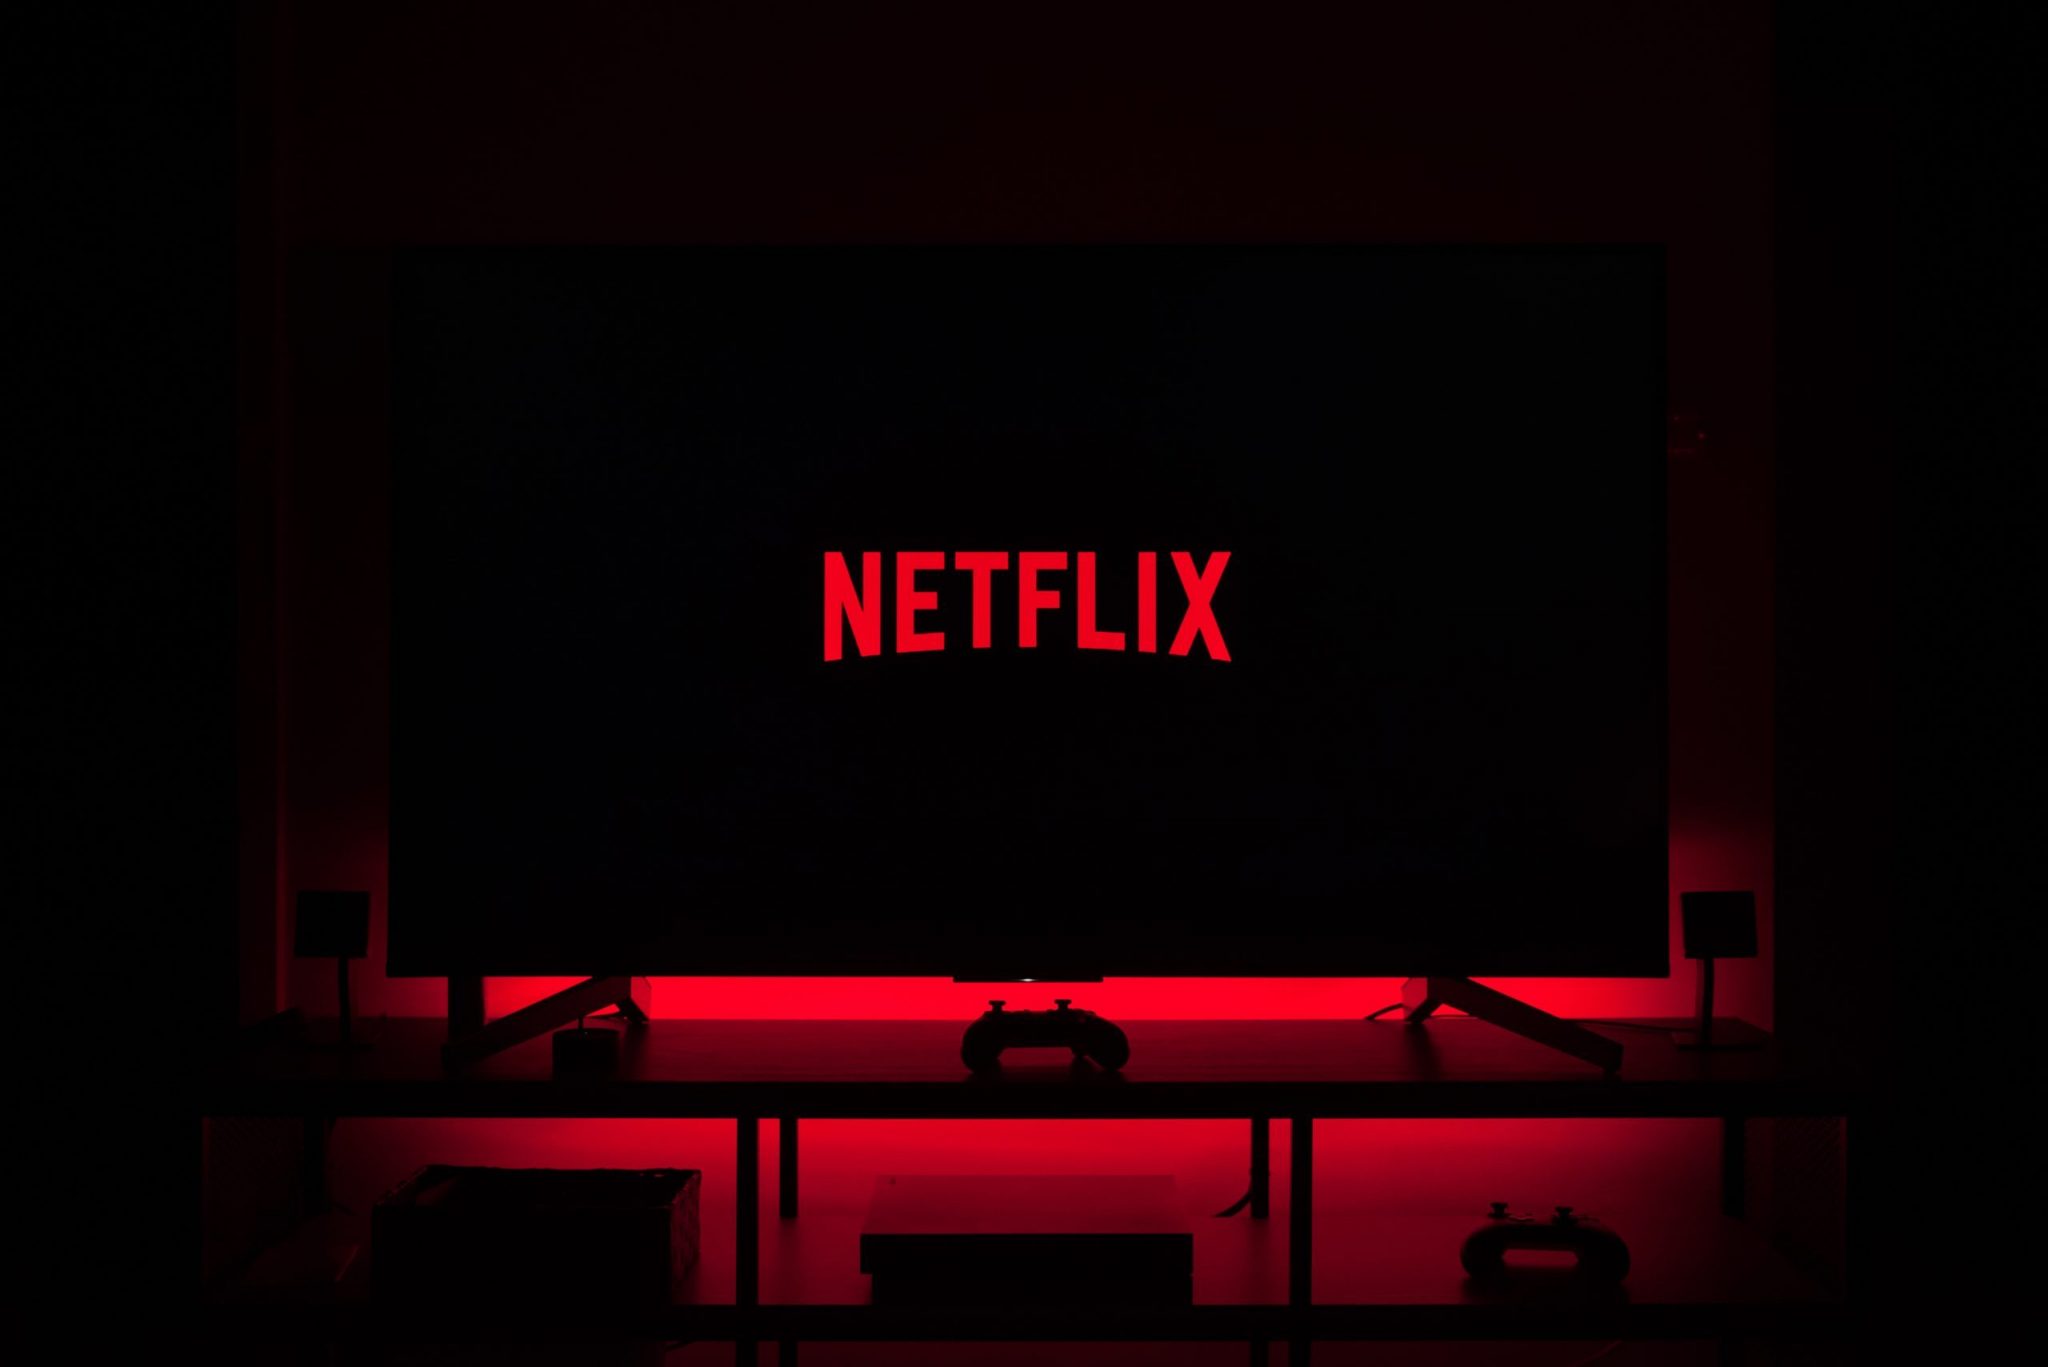 Netflix – The Ultimate Content Marketer